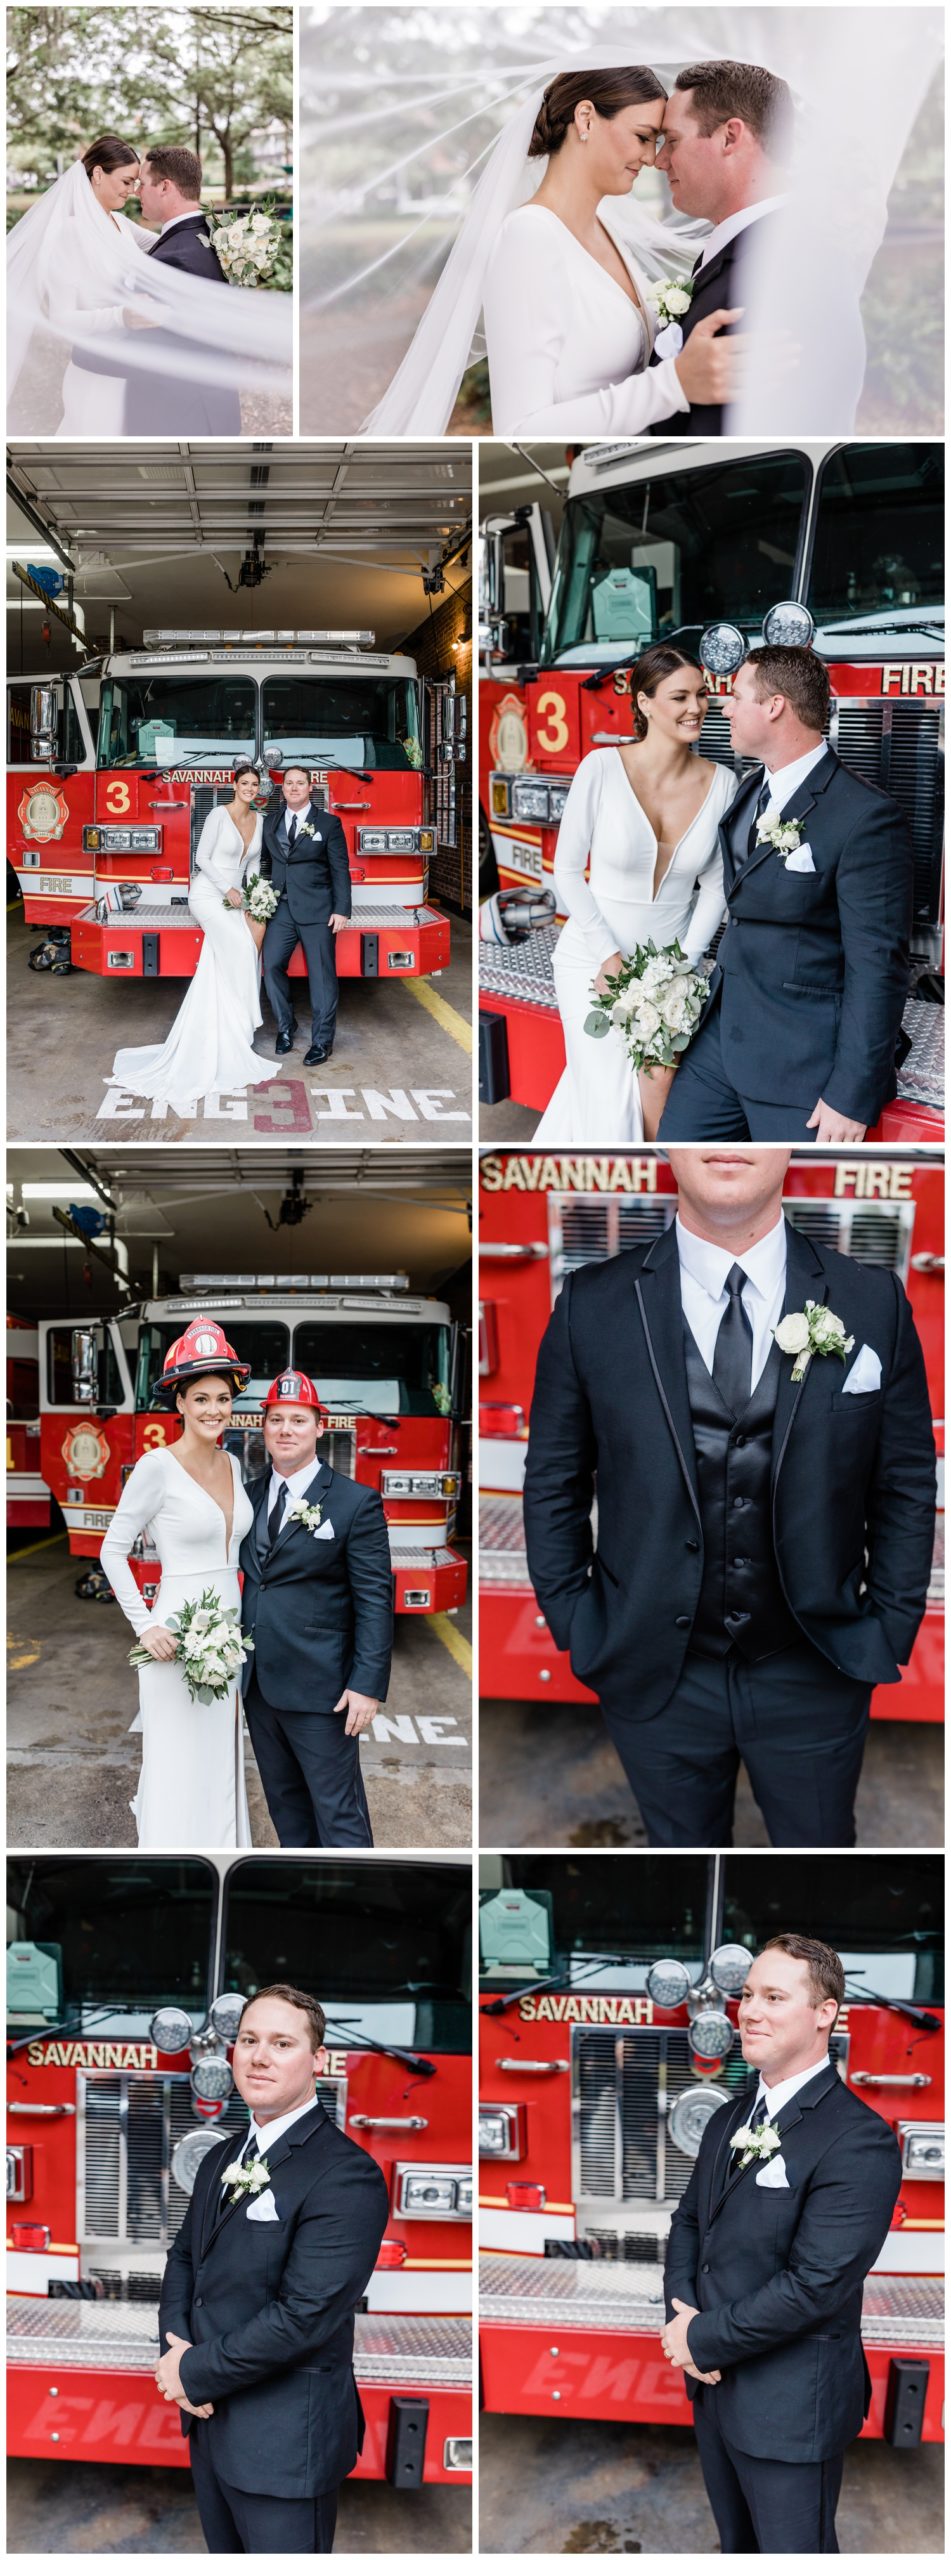 Couples portraits at fire station - the savannah elopement package